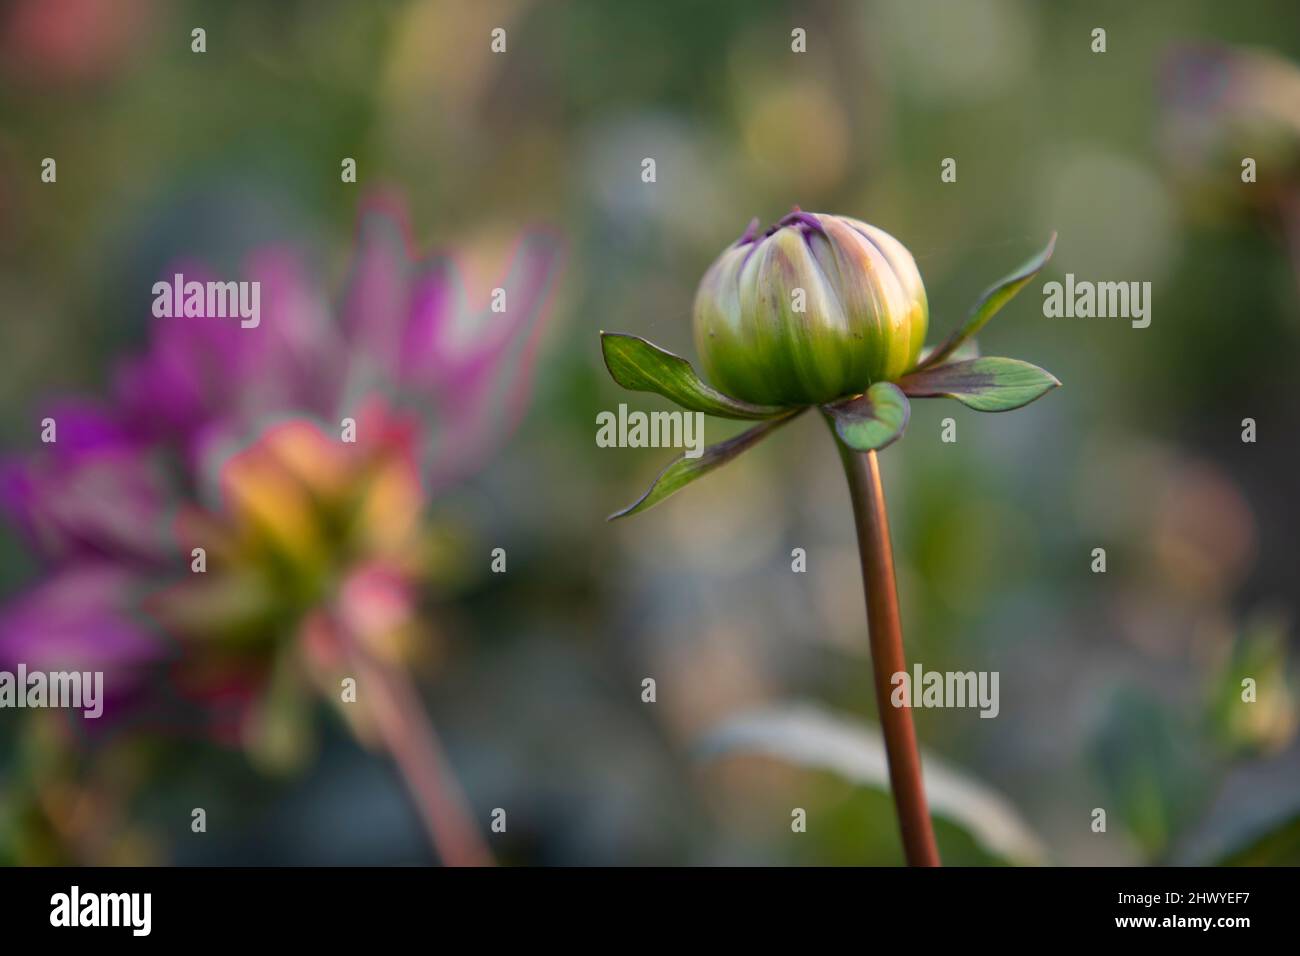 Beautiful Flower Bud with Blurry Background. Spring Dahlia Flower bud natural view. Stock Photo